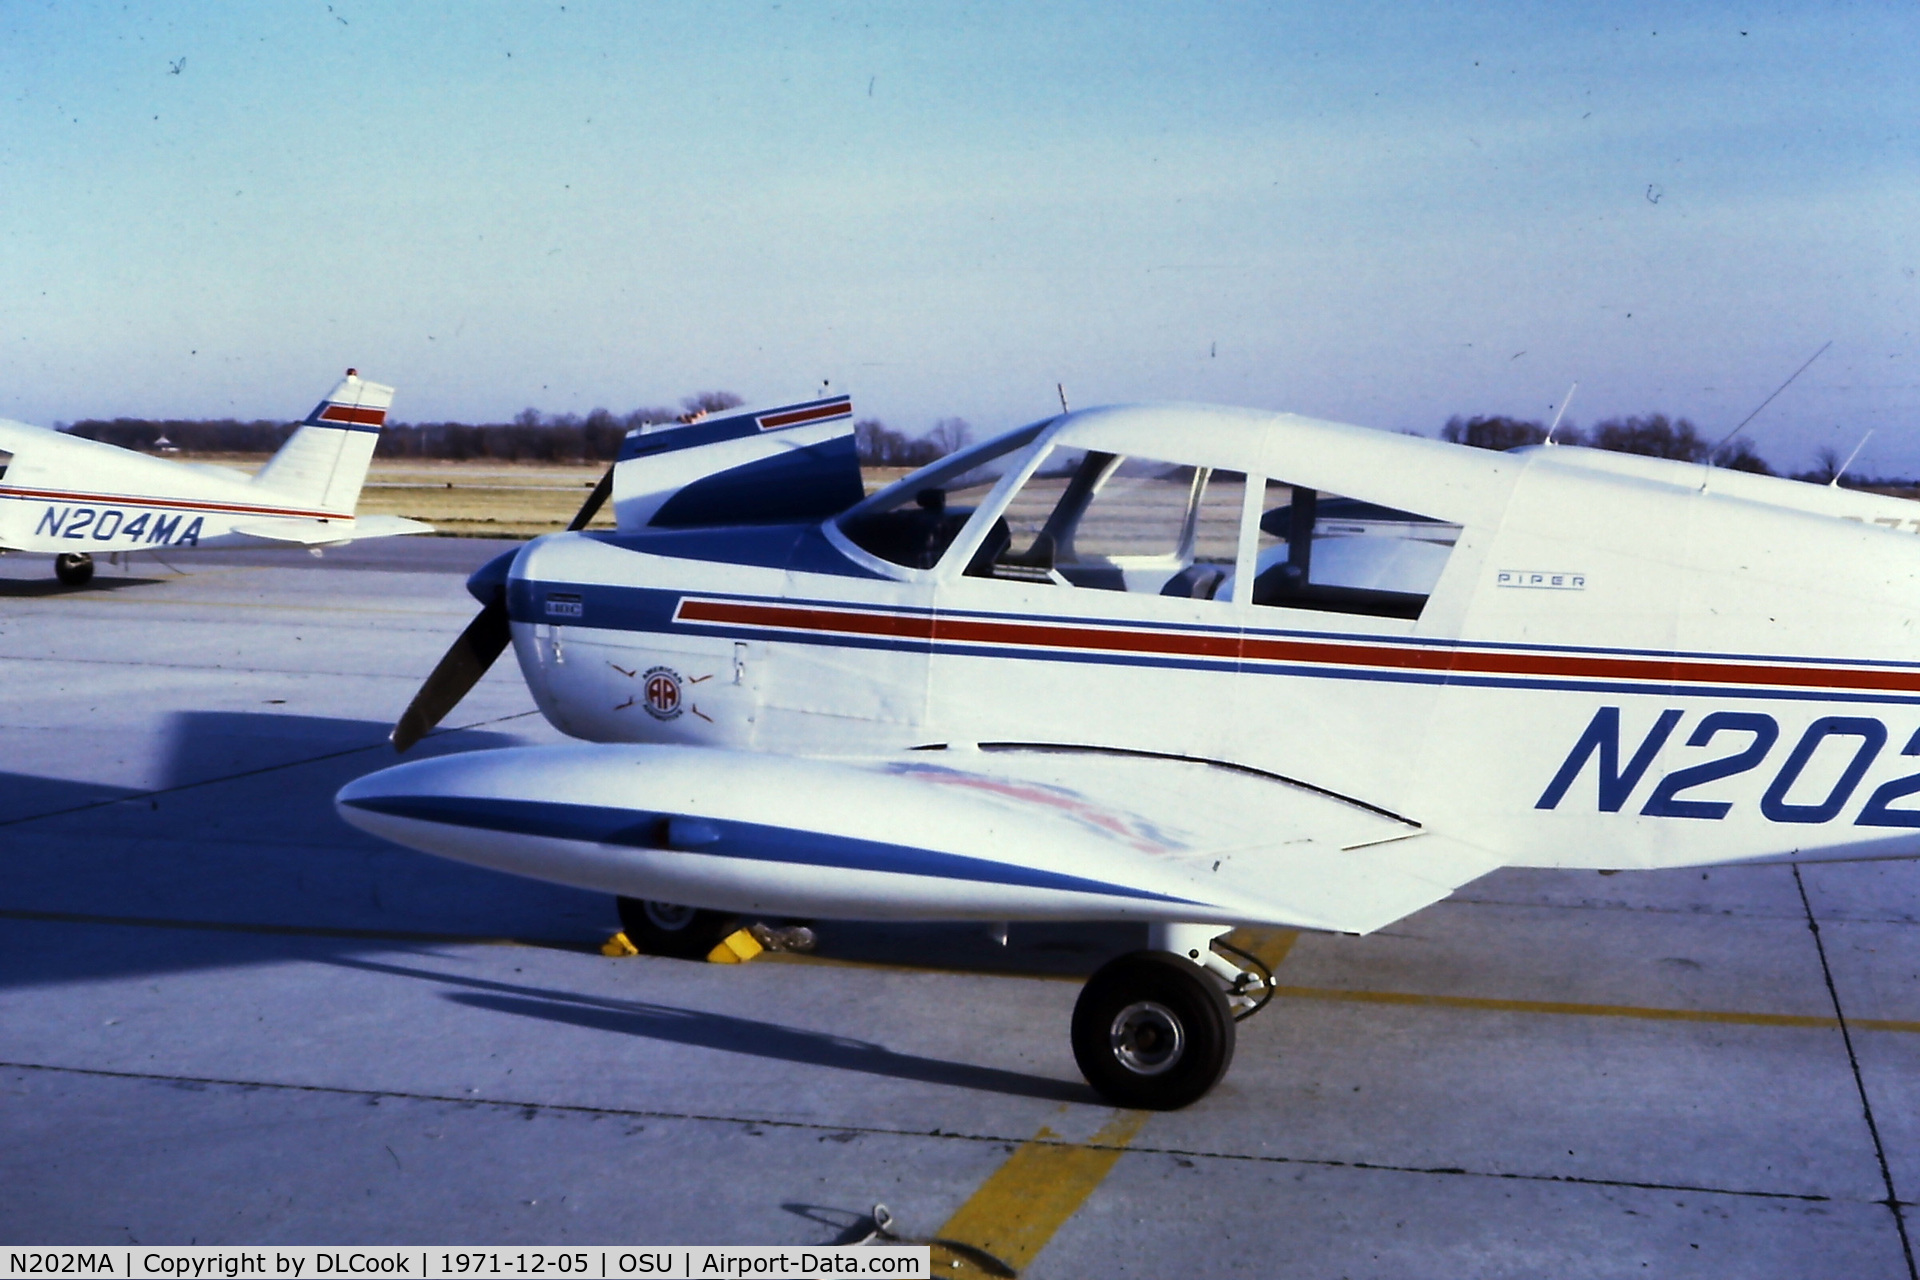 N202MA, 1970 Piper PA-28-140 C/N 28-26740, from slide library